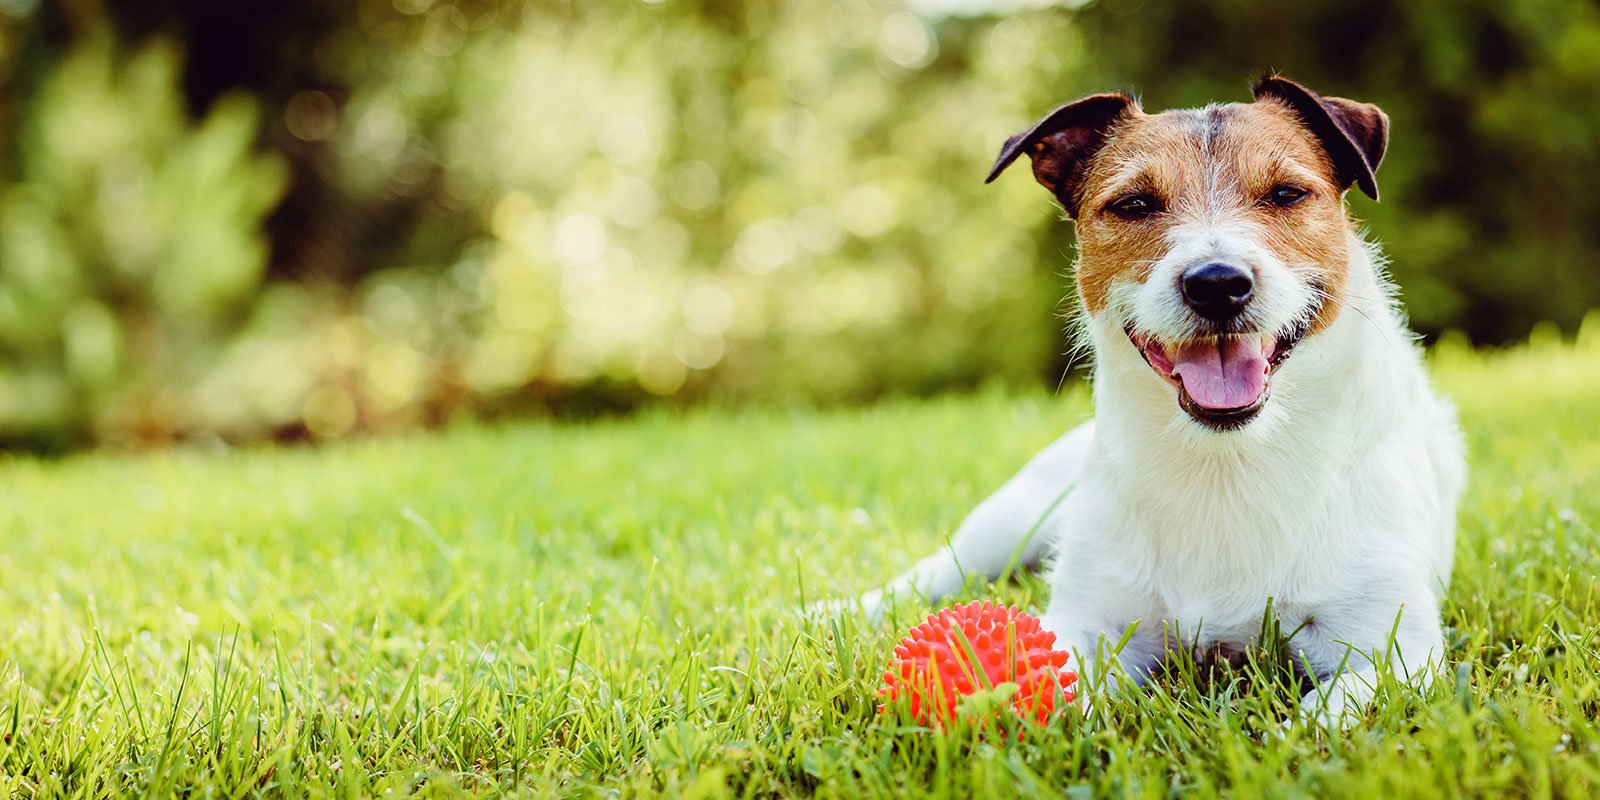 Happy dog sitting in grass with ball